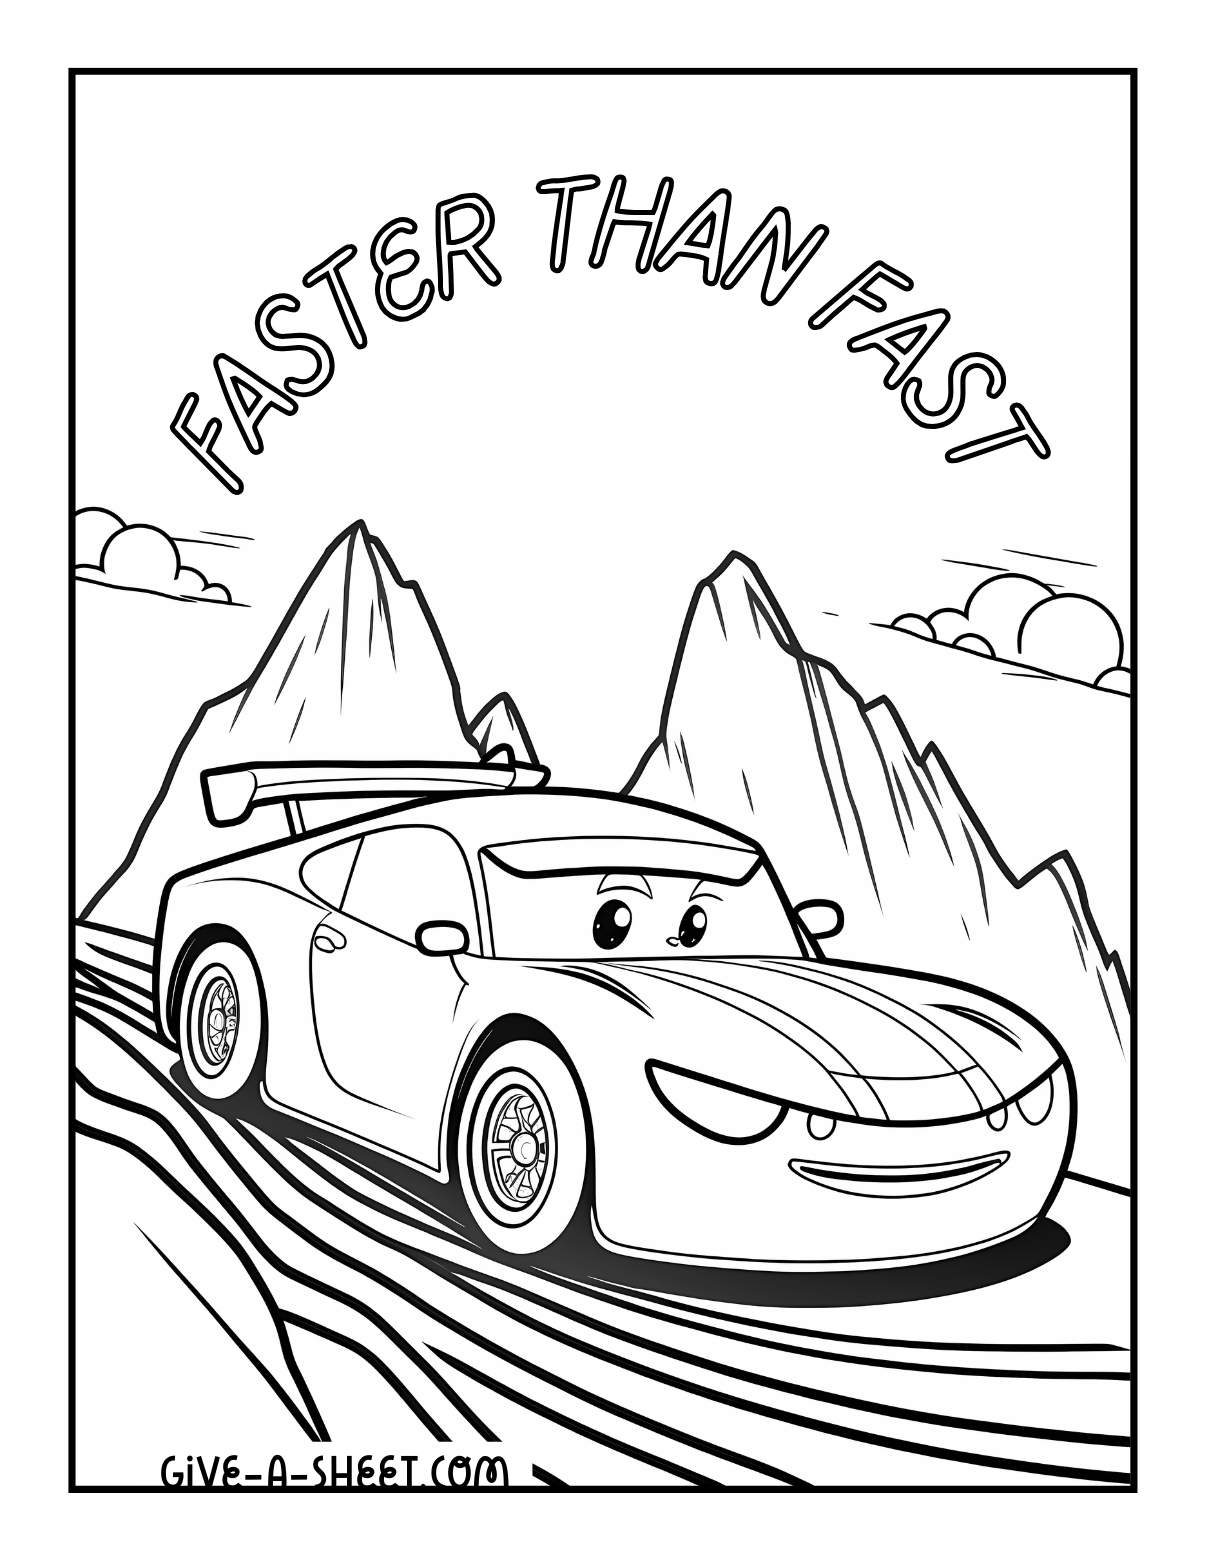 Lightning McQueen race car coloring page for kids.